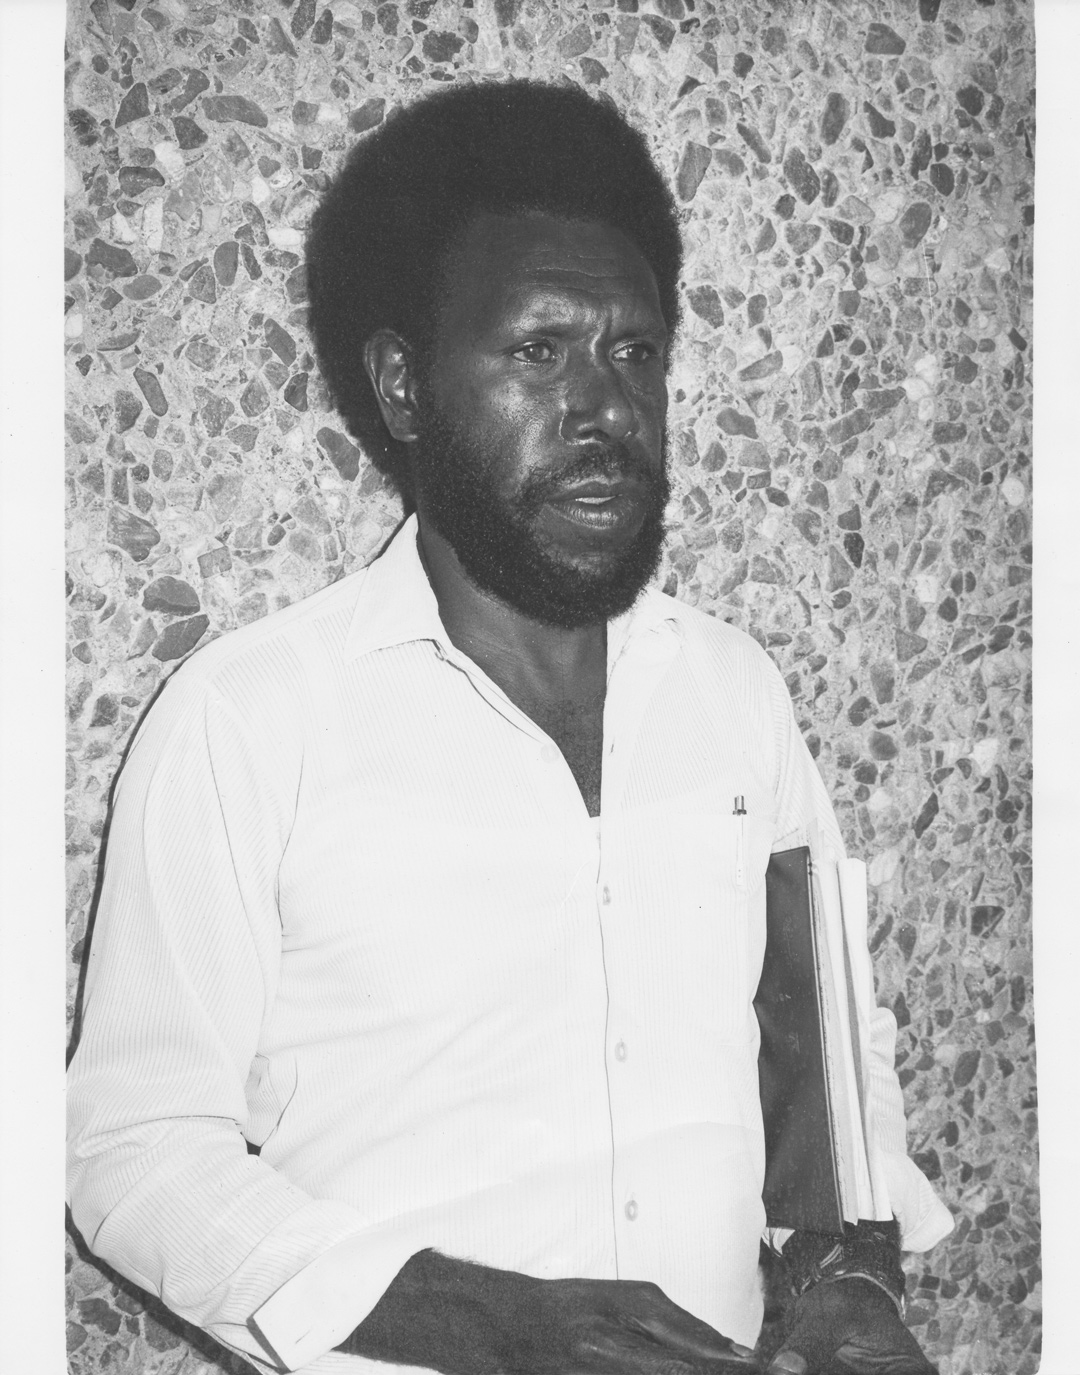 Eddie Koiki Mabo, The Torres Strait Islander Community (1982) - Race and Culture course lectures. ©️ James Cook University.